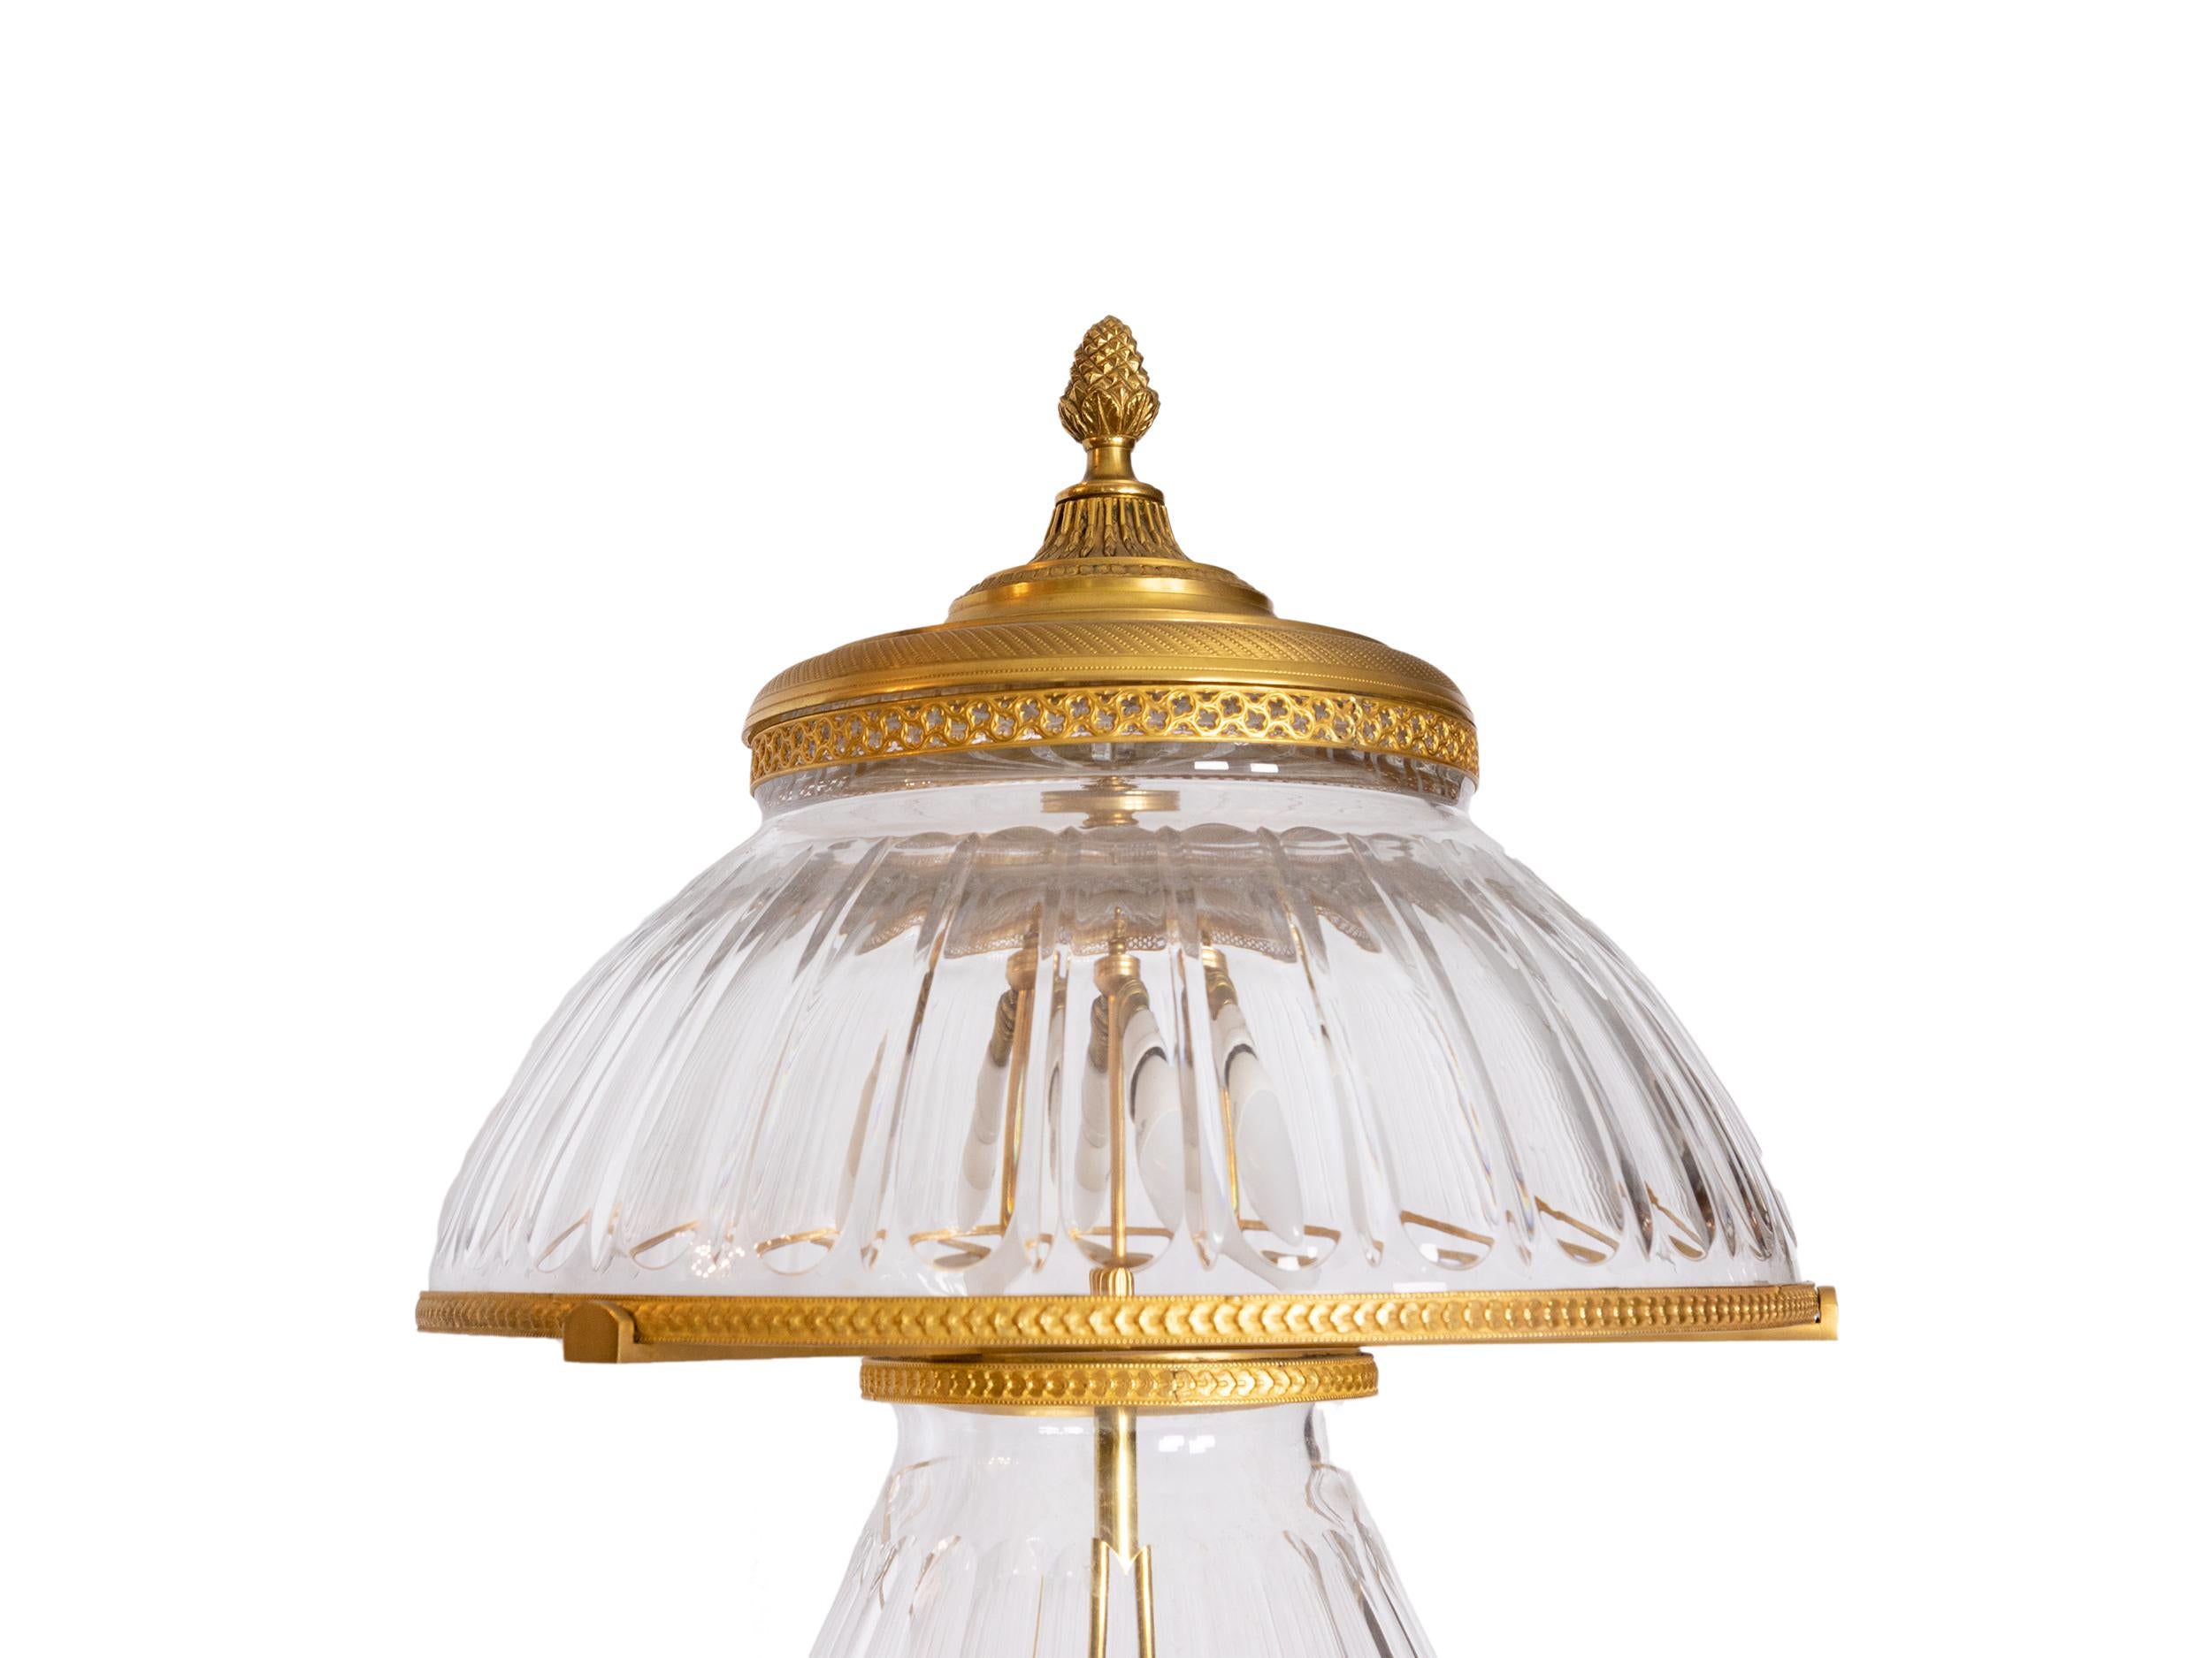 Neoclassical Revival Neoclassical Crystal Table Lamp Louis XV Inspired 20th Century For Sale